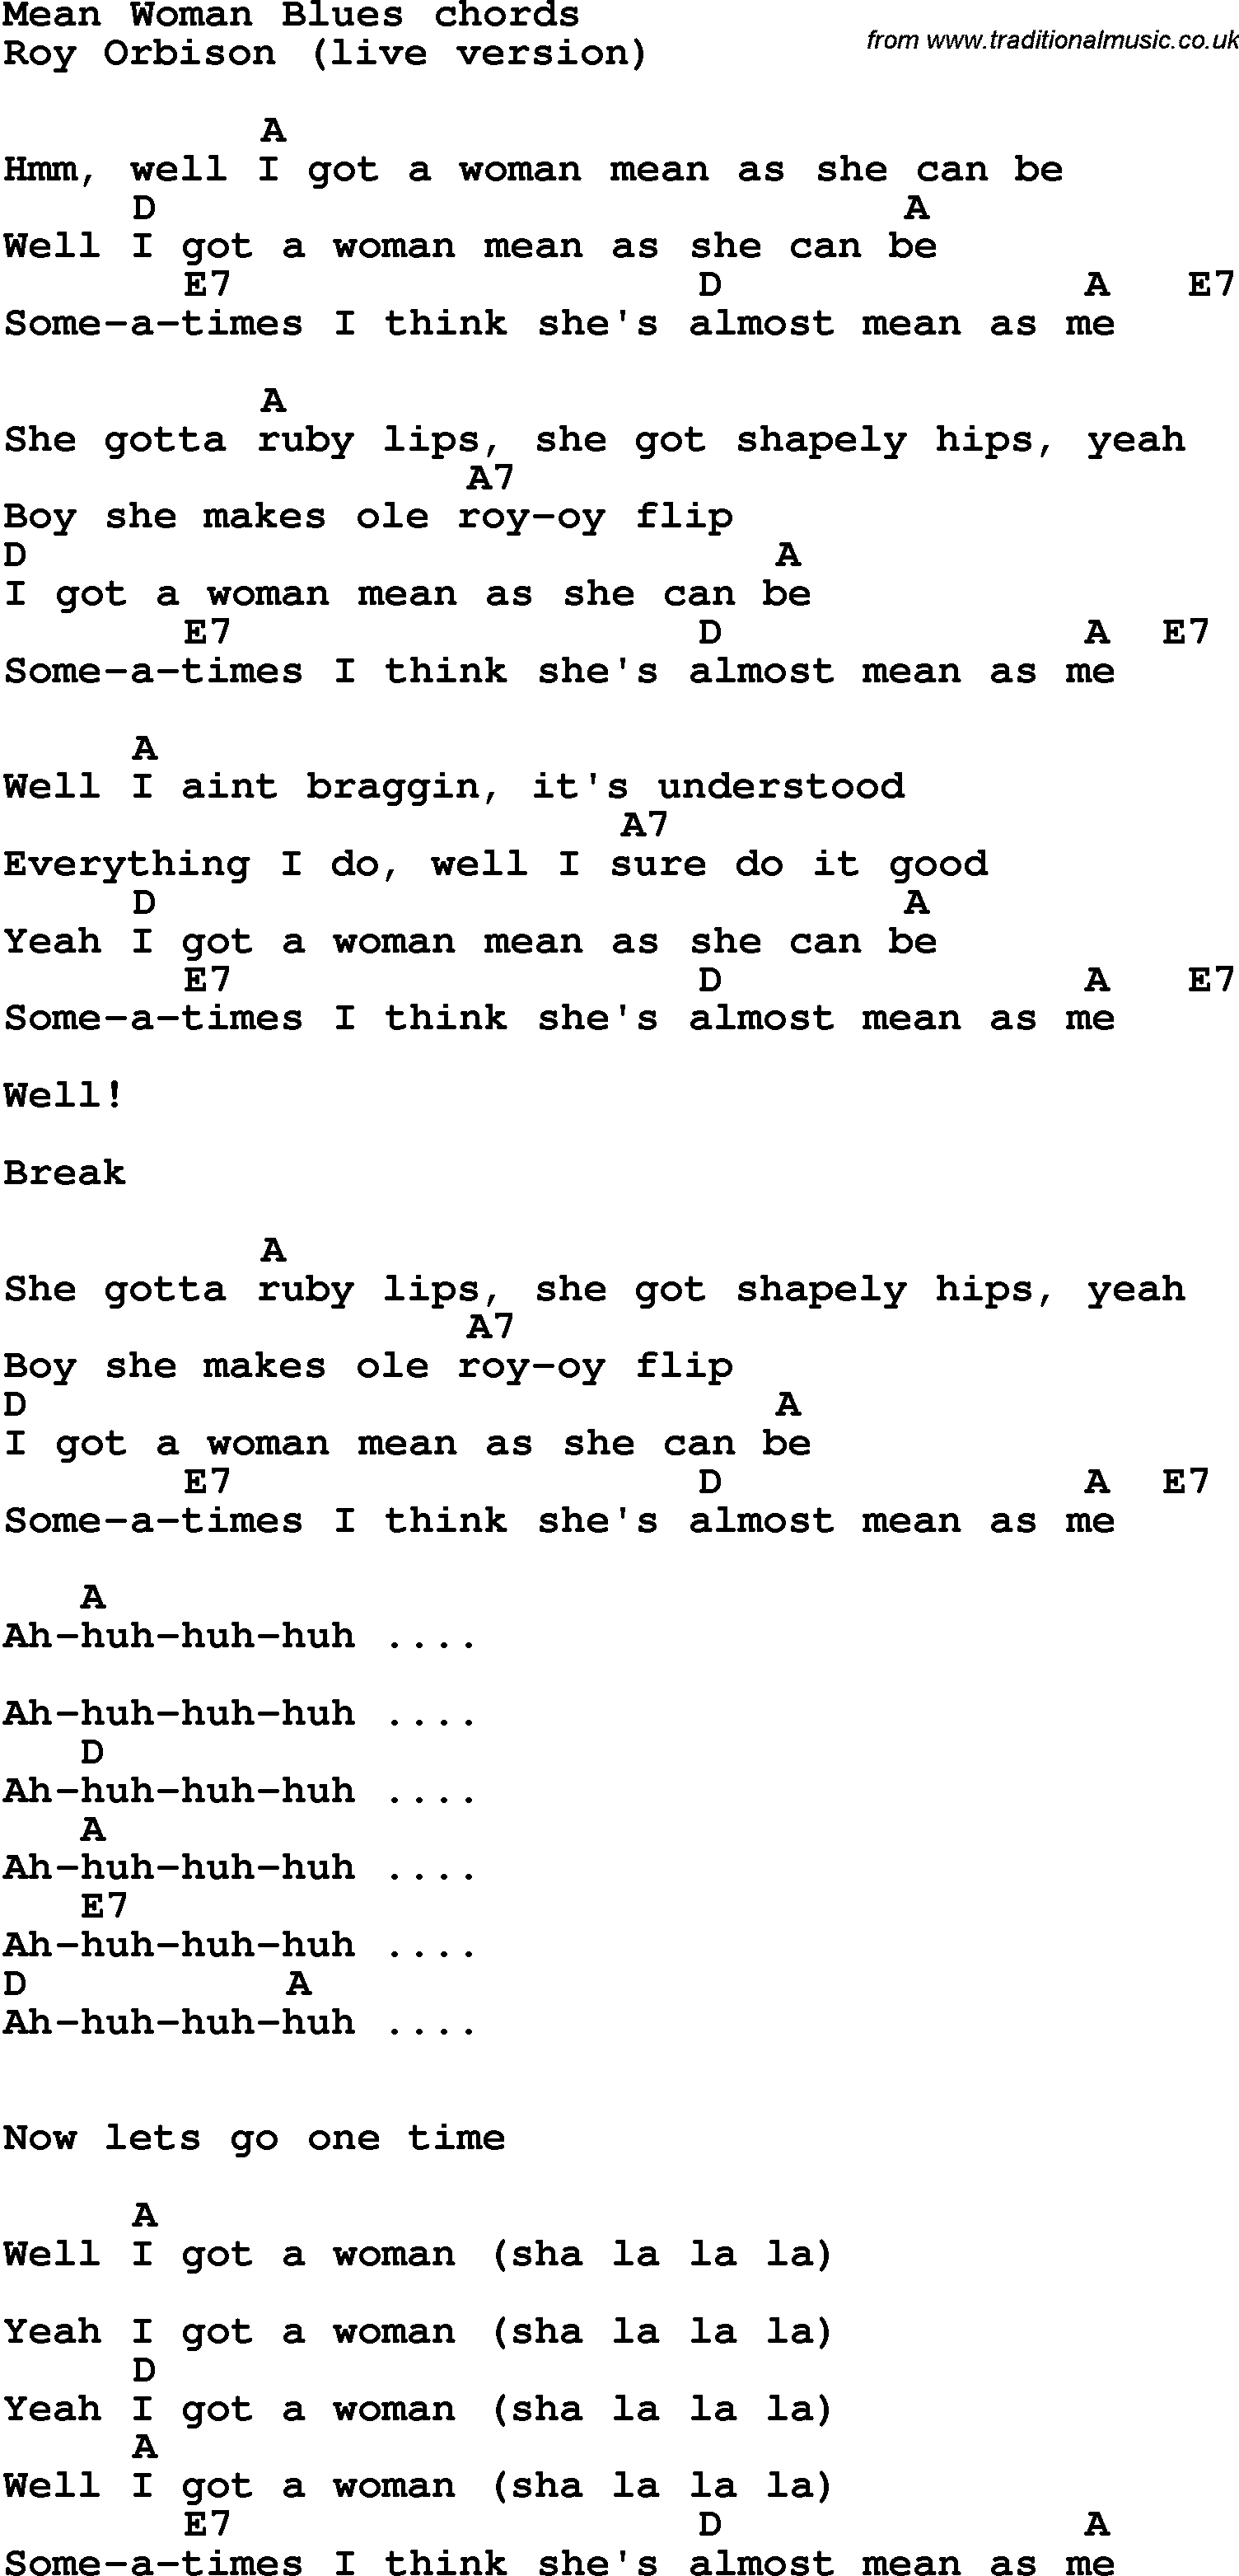 Song Lyrics with guitar chords for Mean Woman Blues - Roy Orbison